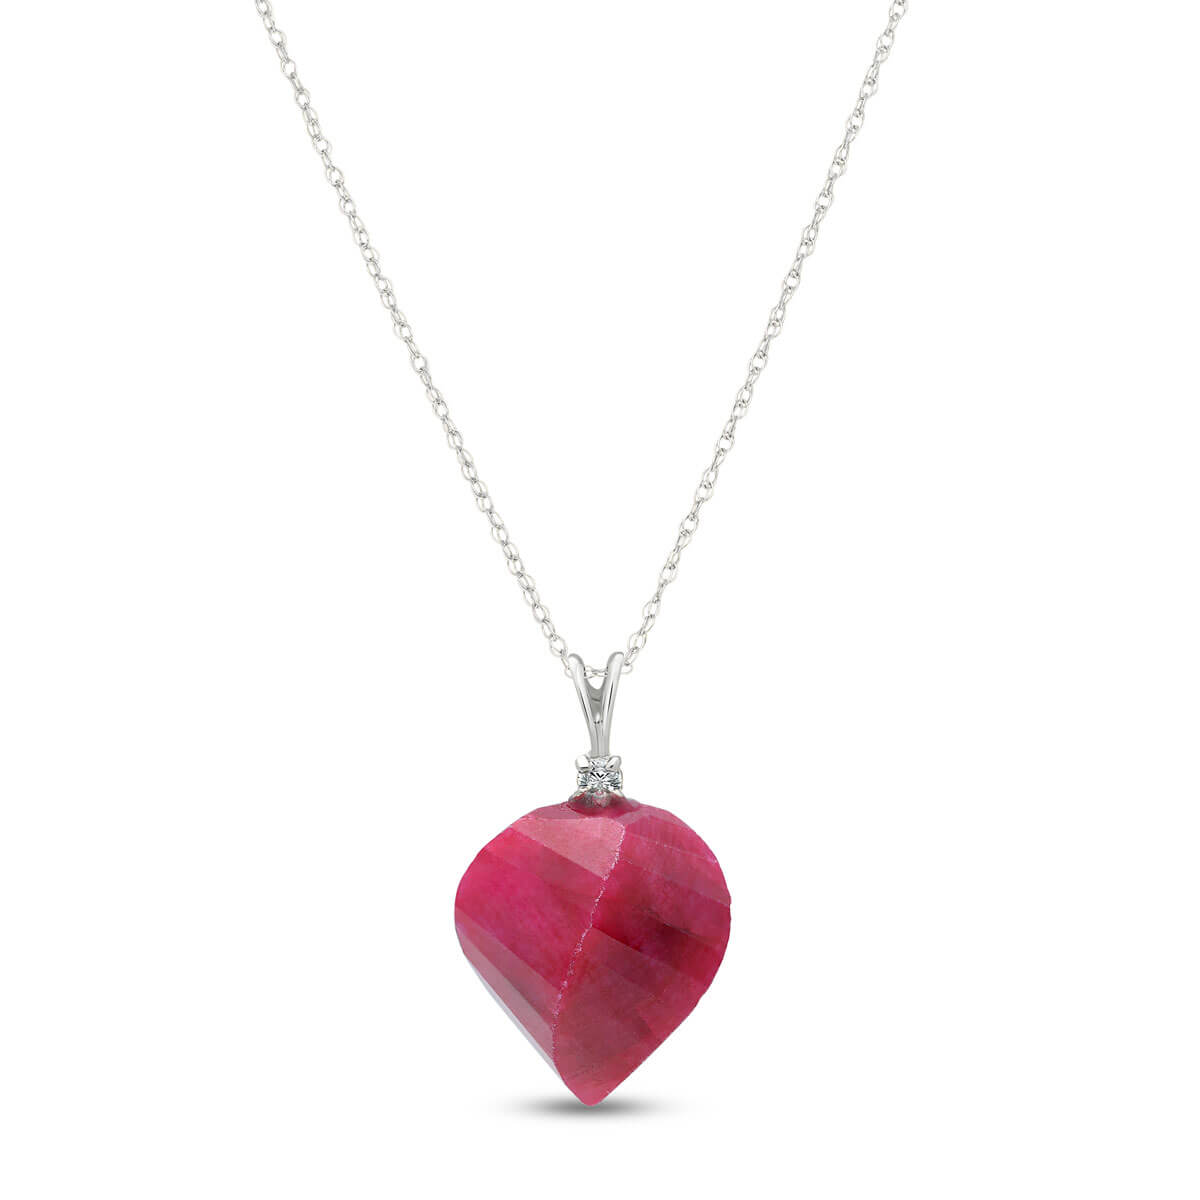 Twisted Briolette Cut Ruby Pendant Necklace 15.3 ctw in 9ct White Gold